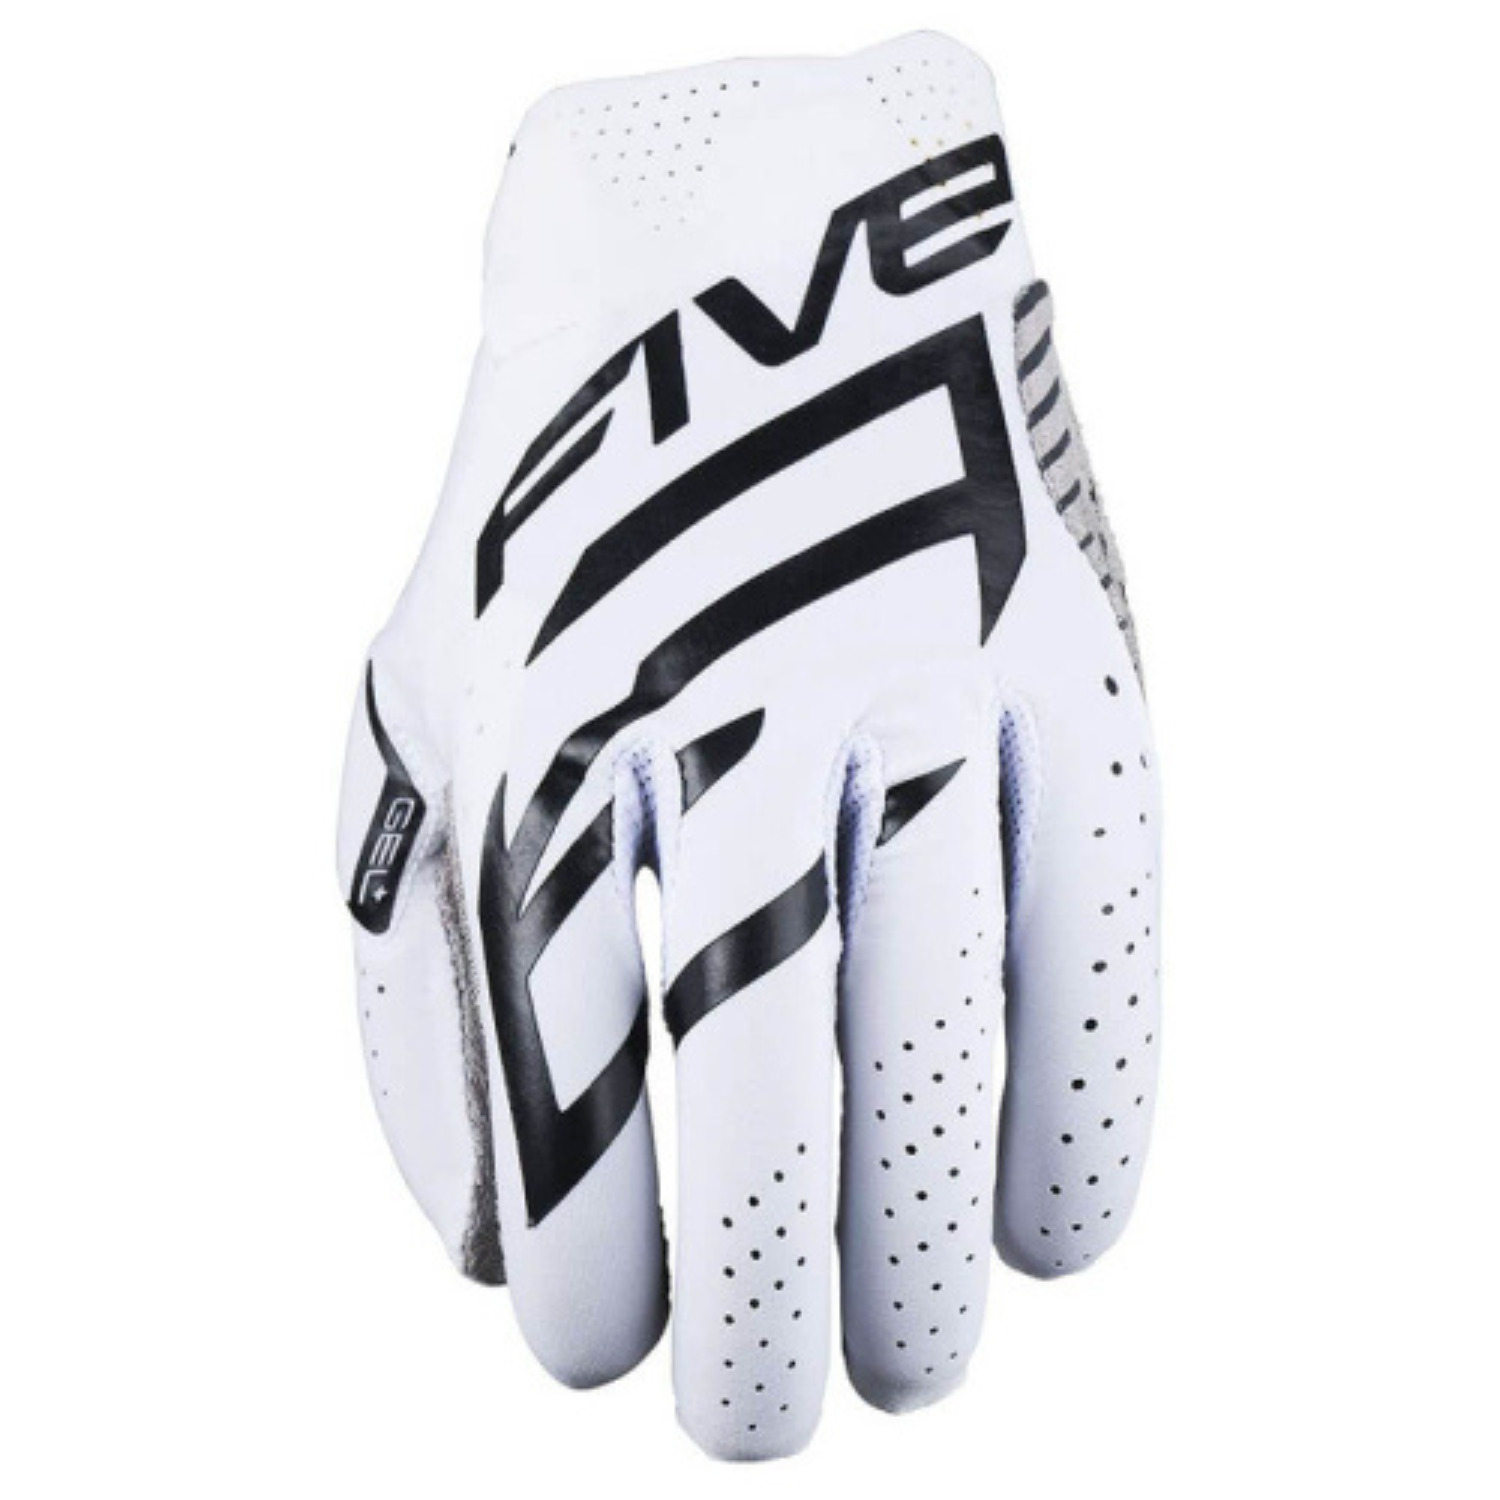 Image of Five MXF Race Gloves White Black Size XL ID 3841300111785